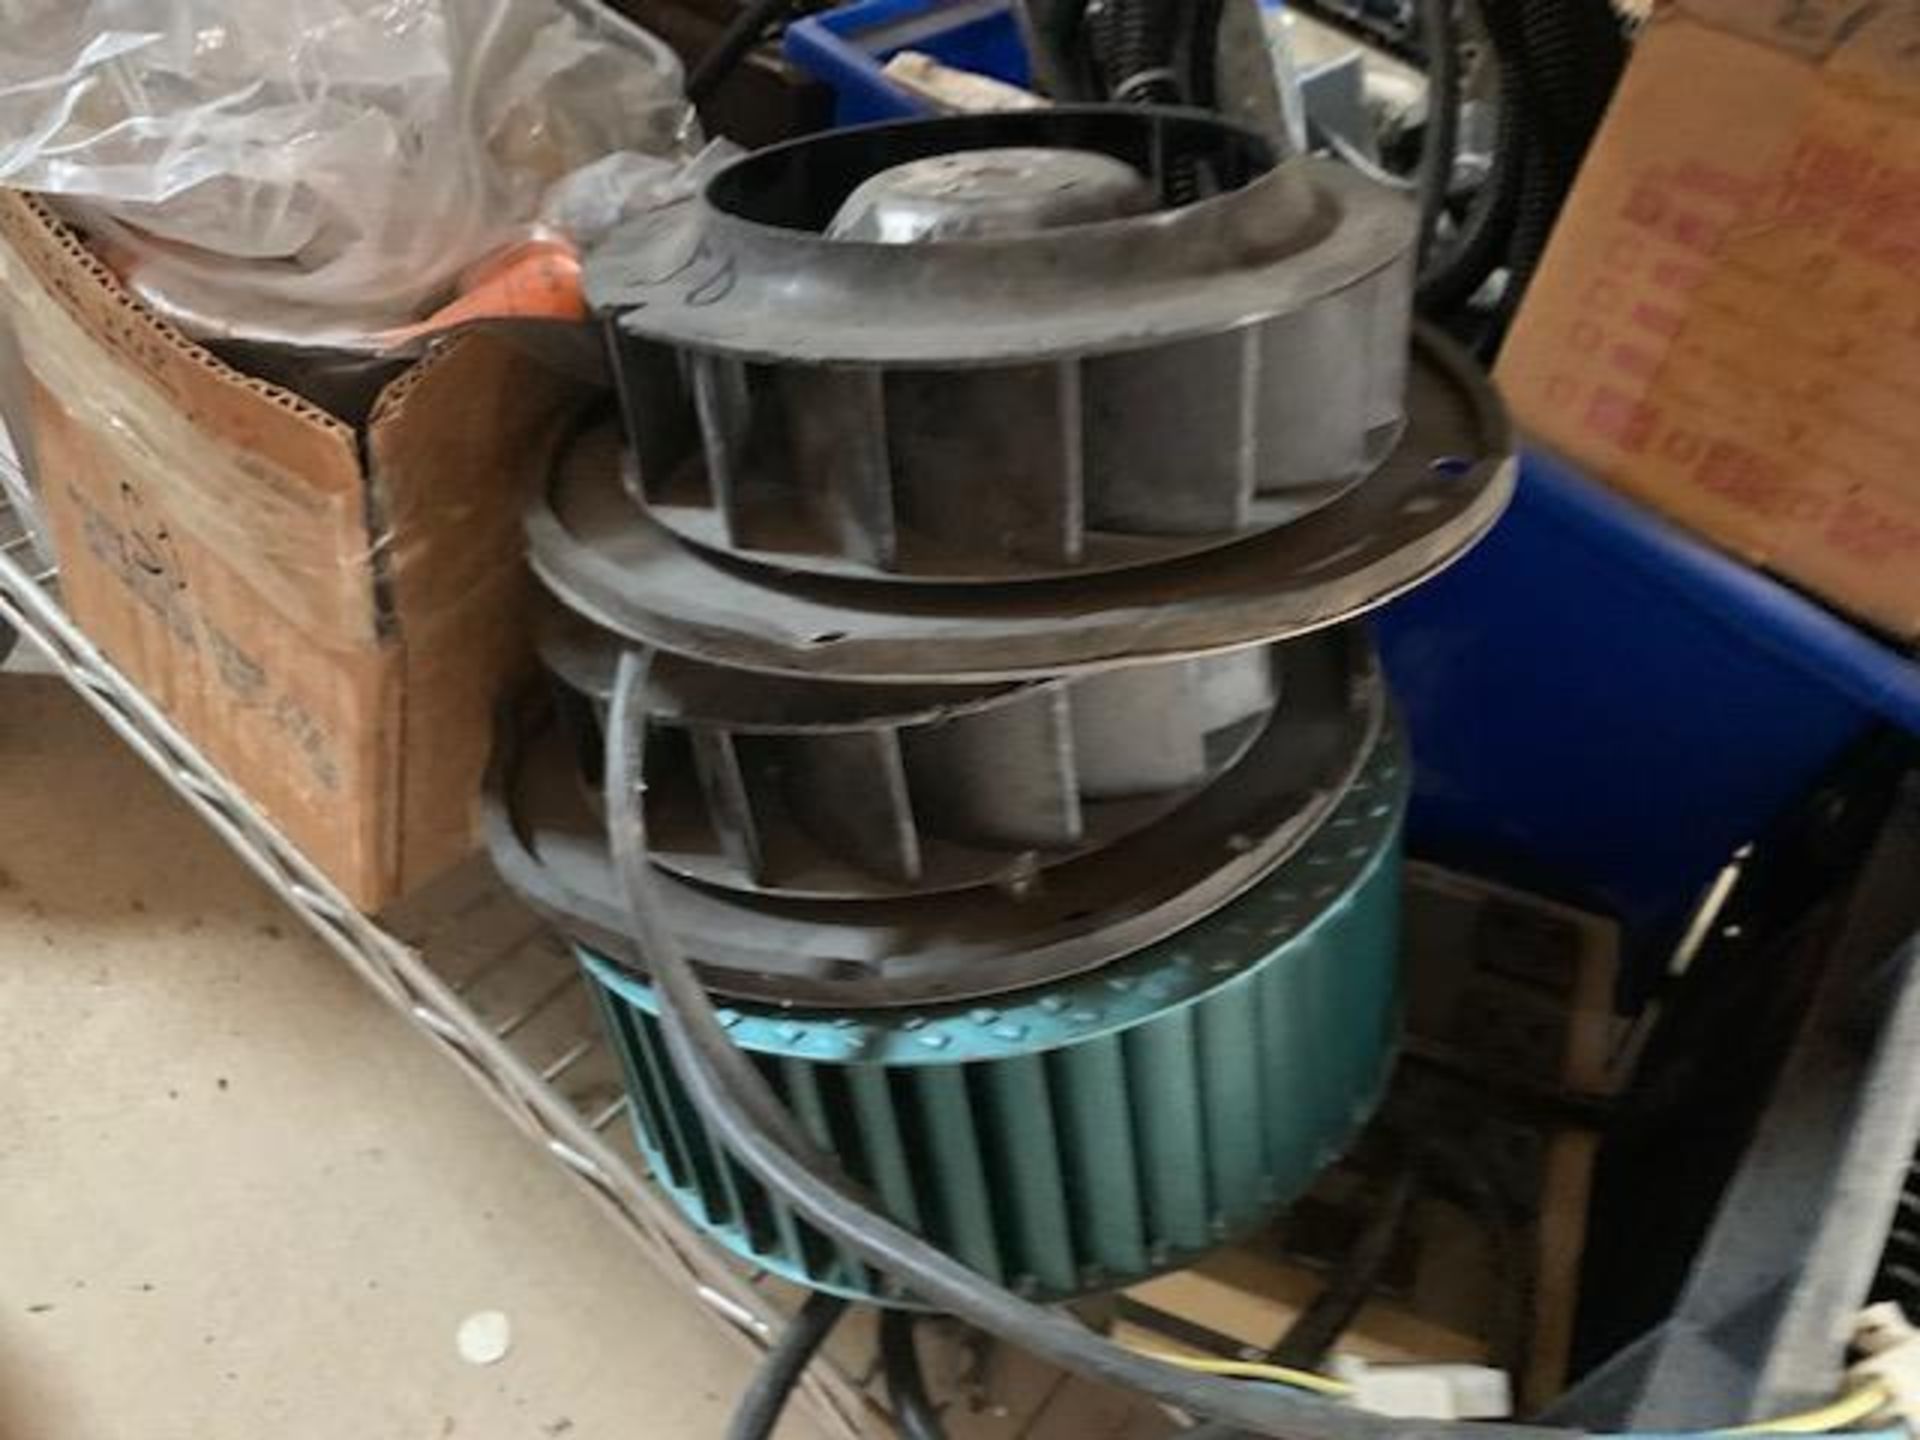 LOT OF ASSORTMENT OF HEATING FANS, HINGES, FANS, MOTORIZED FANS, RIGGING FEE $ - Image 3 of 3